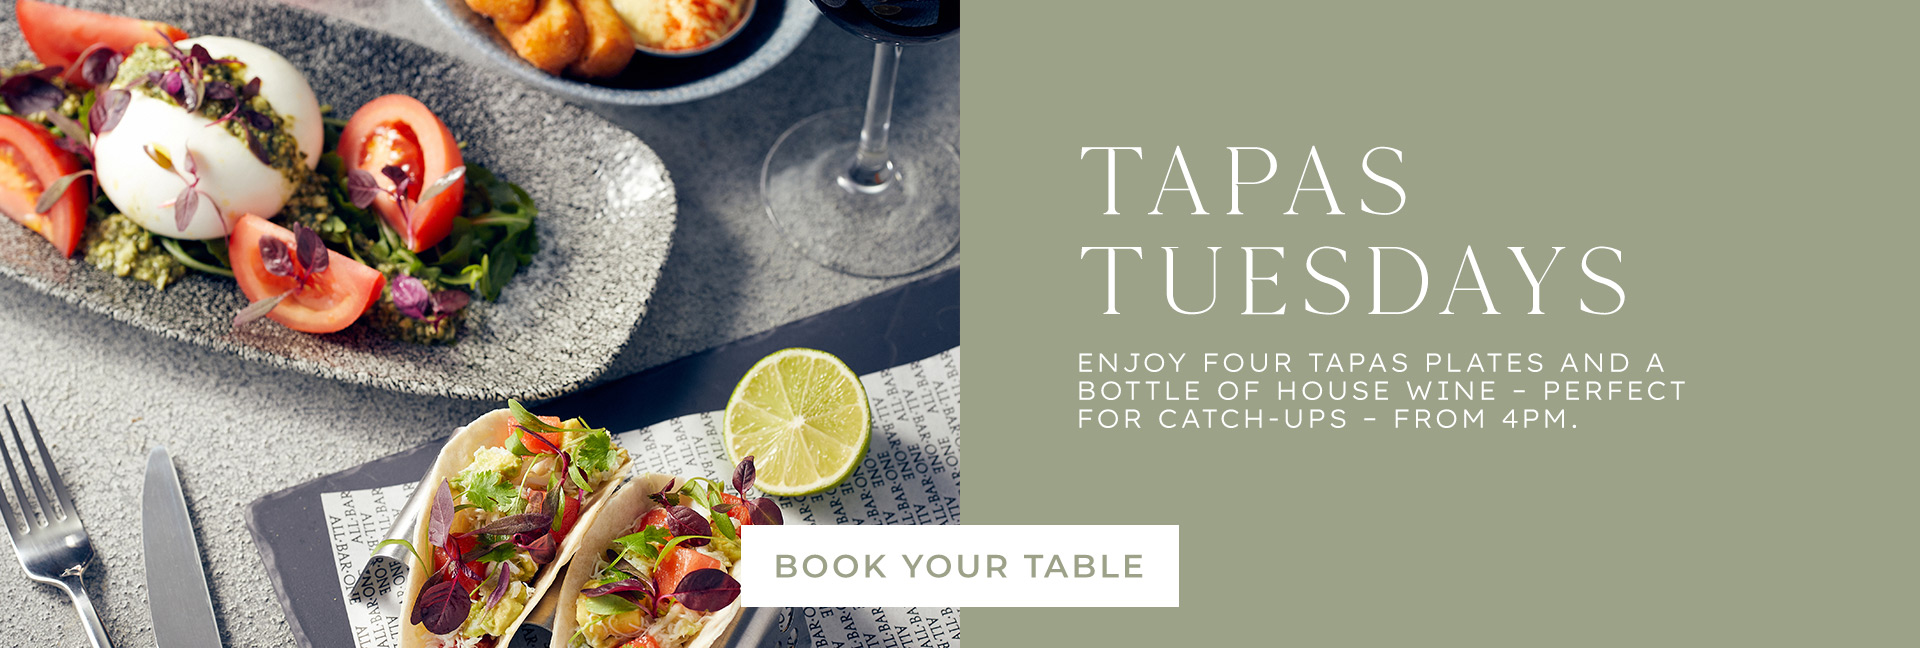 Tapas Tuesday at All Bar One Cheltenham - Book now